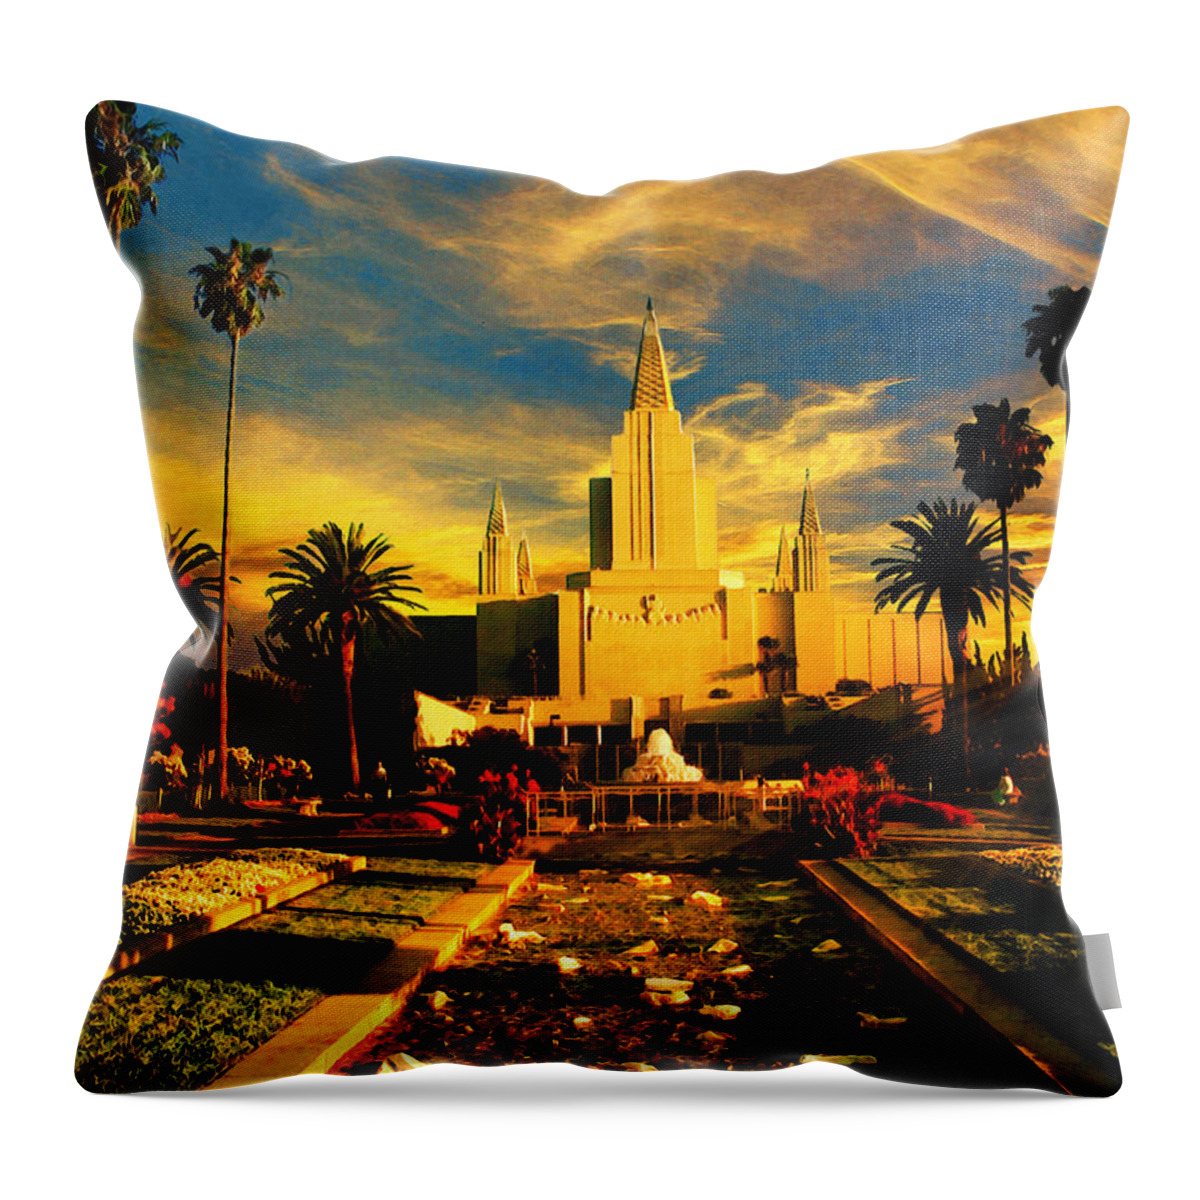 Oakland California Temple Throw Pillow featuring the digital art The Oakland California Temple in sunset light by Nicko Prints